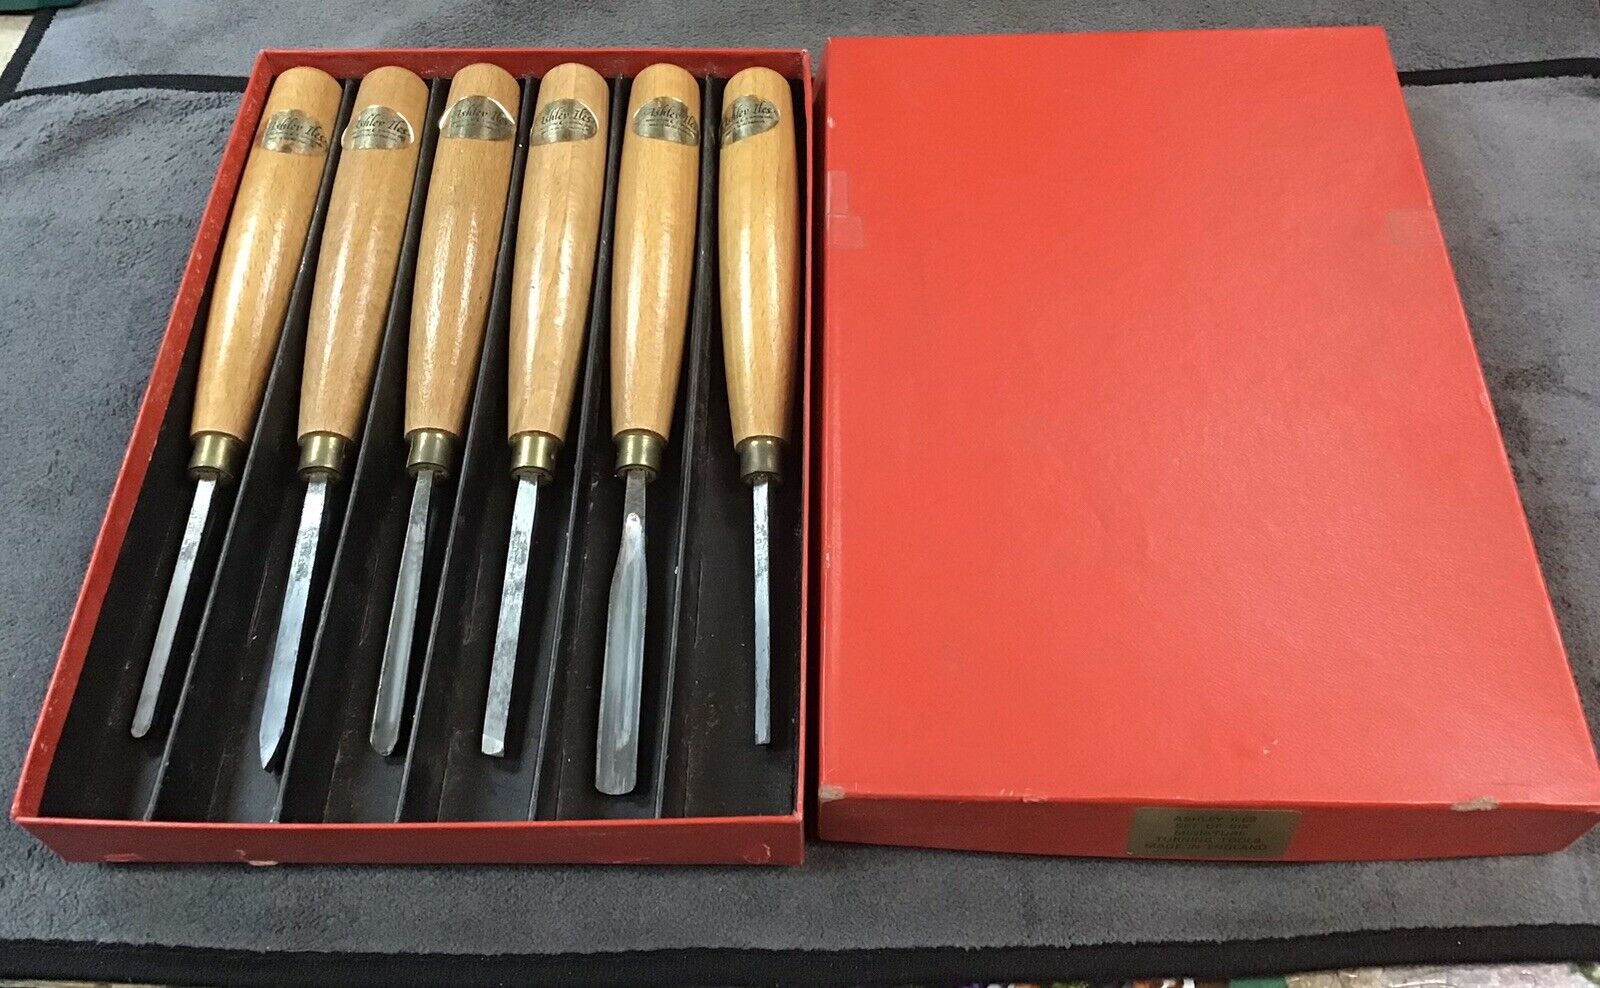 Vintage Ashley Iles Carving Tools Red Box - Set Of 6 Made in England